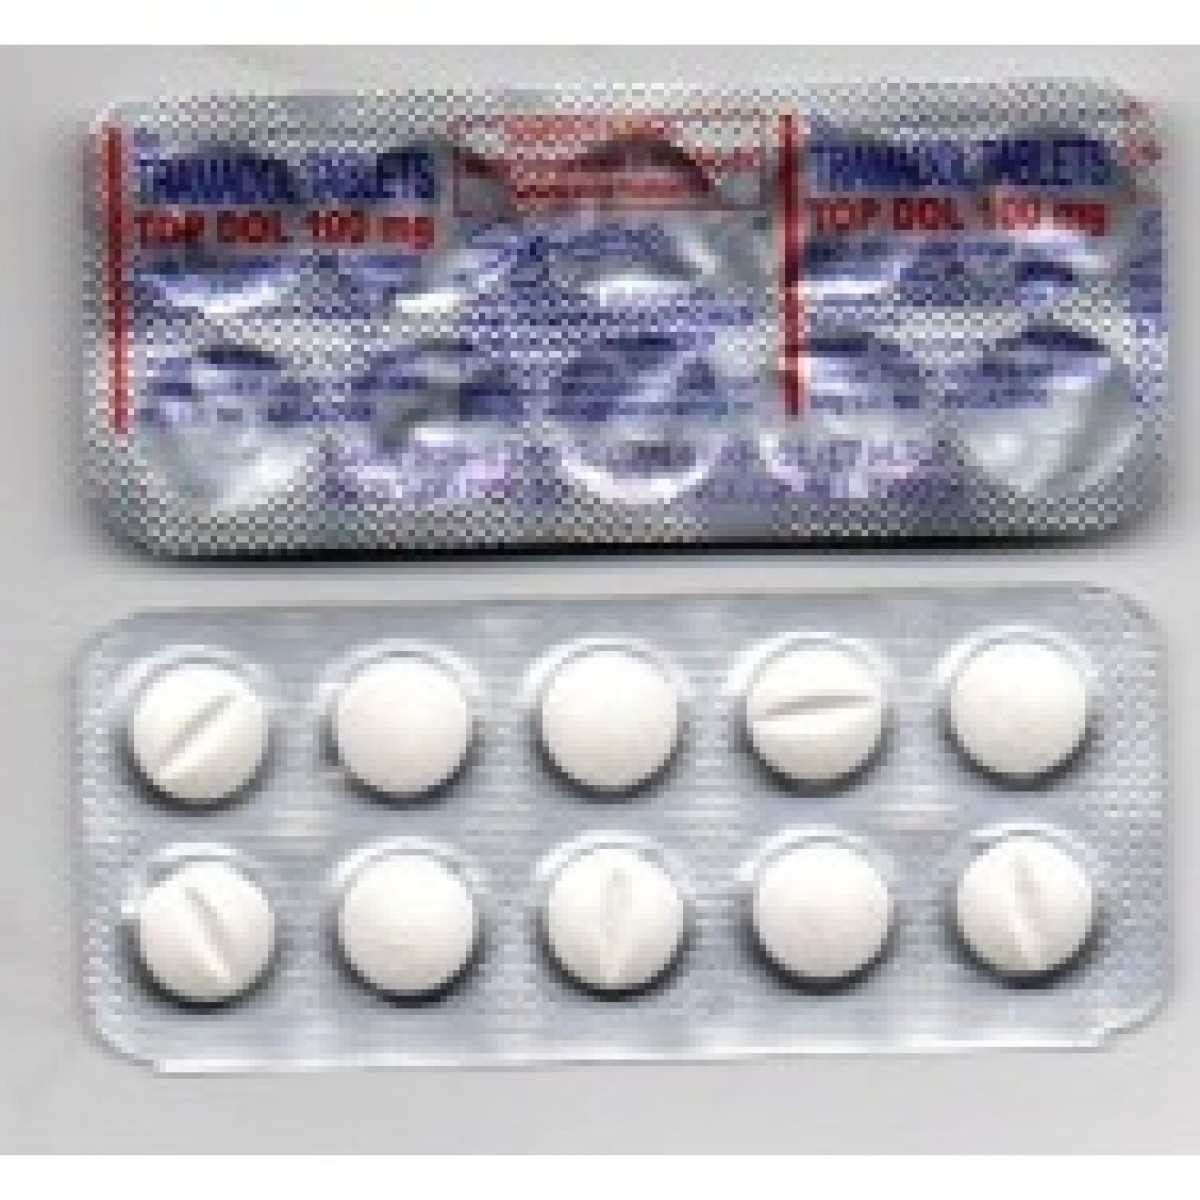 tramadol for pain reviews